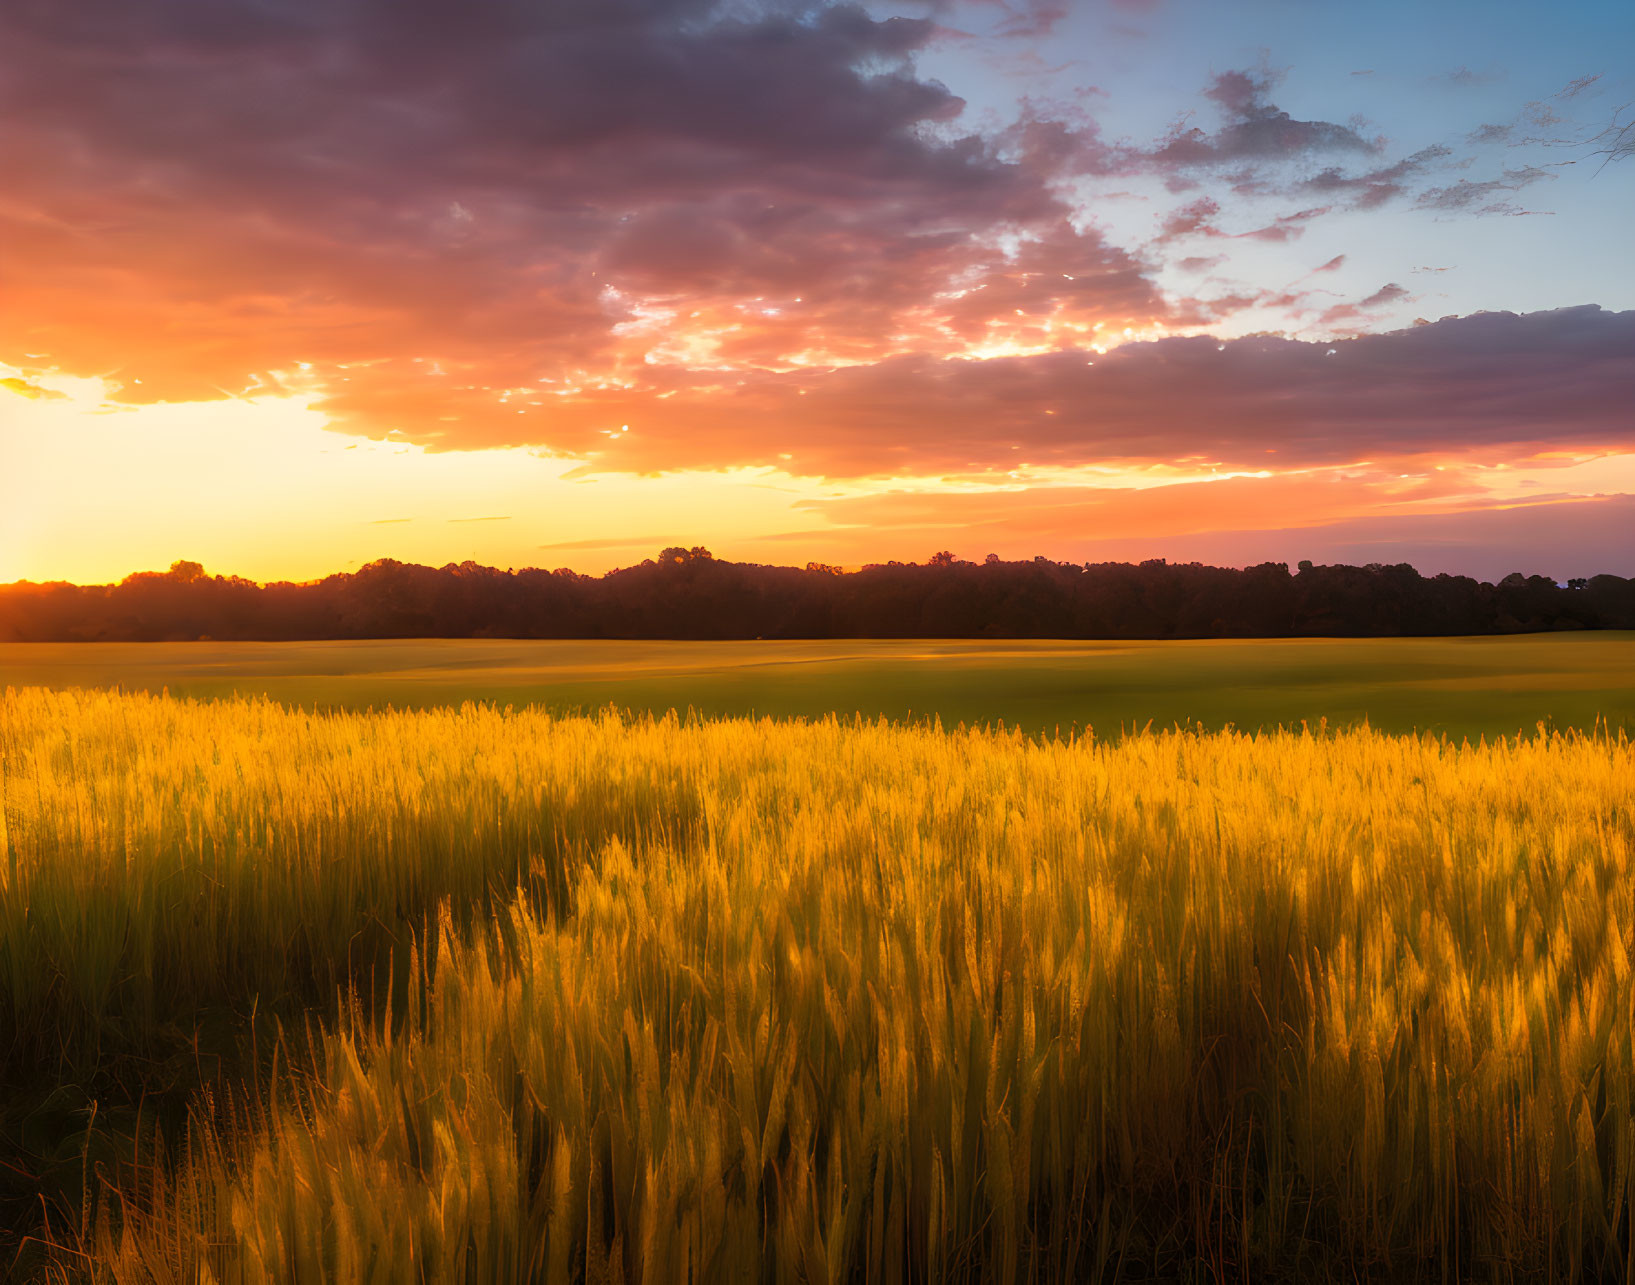 Fiery sunset over golden wheat field in tranquil countryside